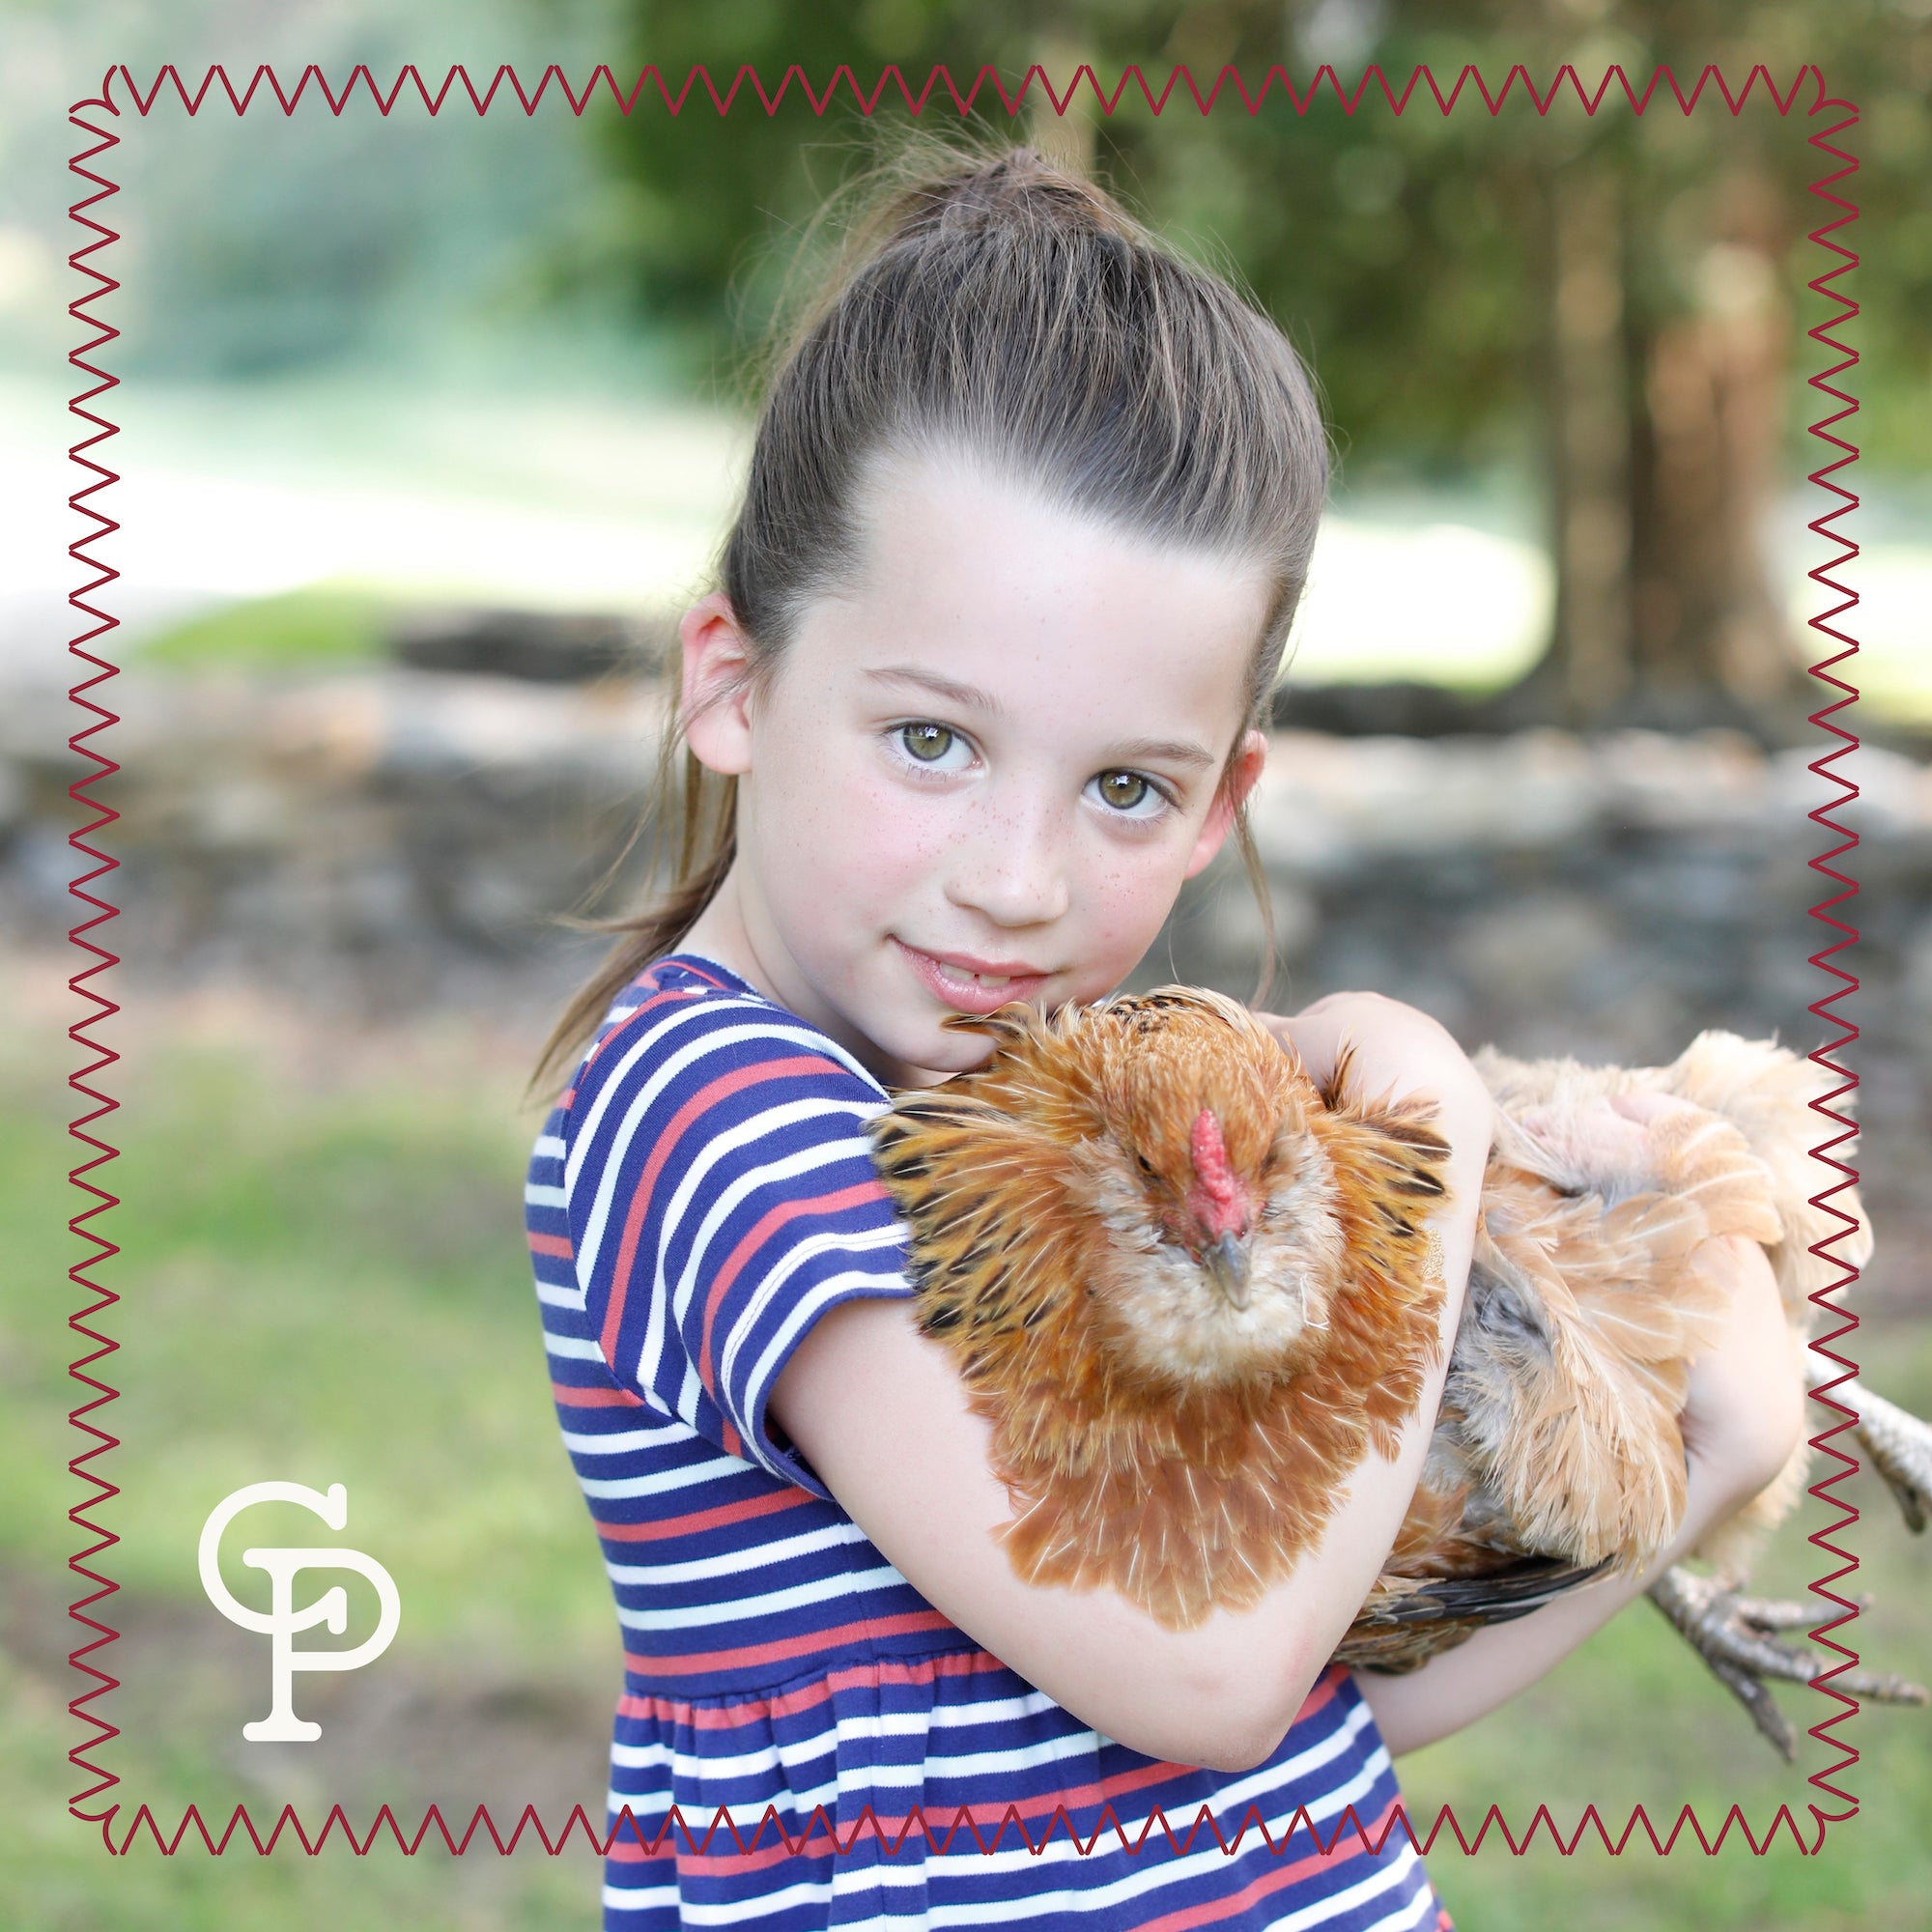 adorable image of a young girl wearing a soft and cozy striped shirt dress holding chicken to the camera